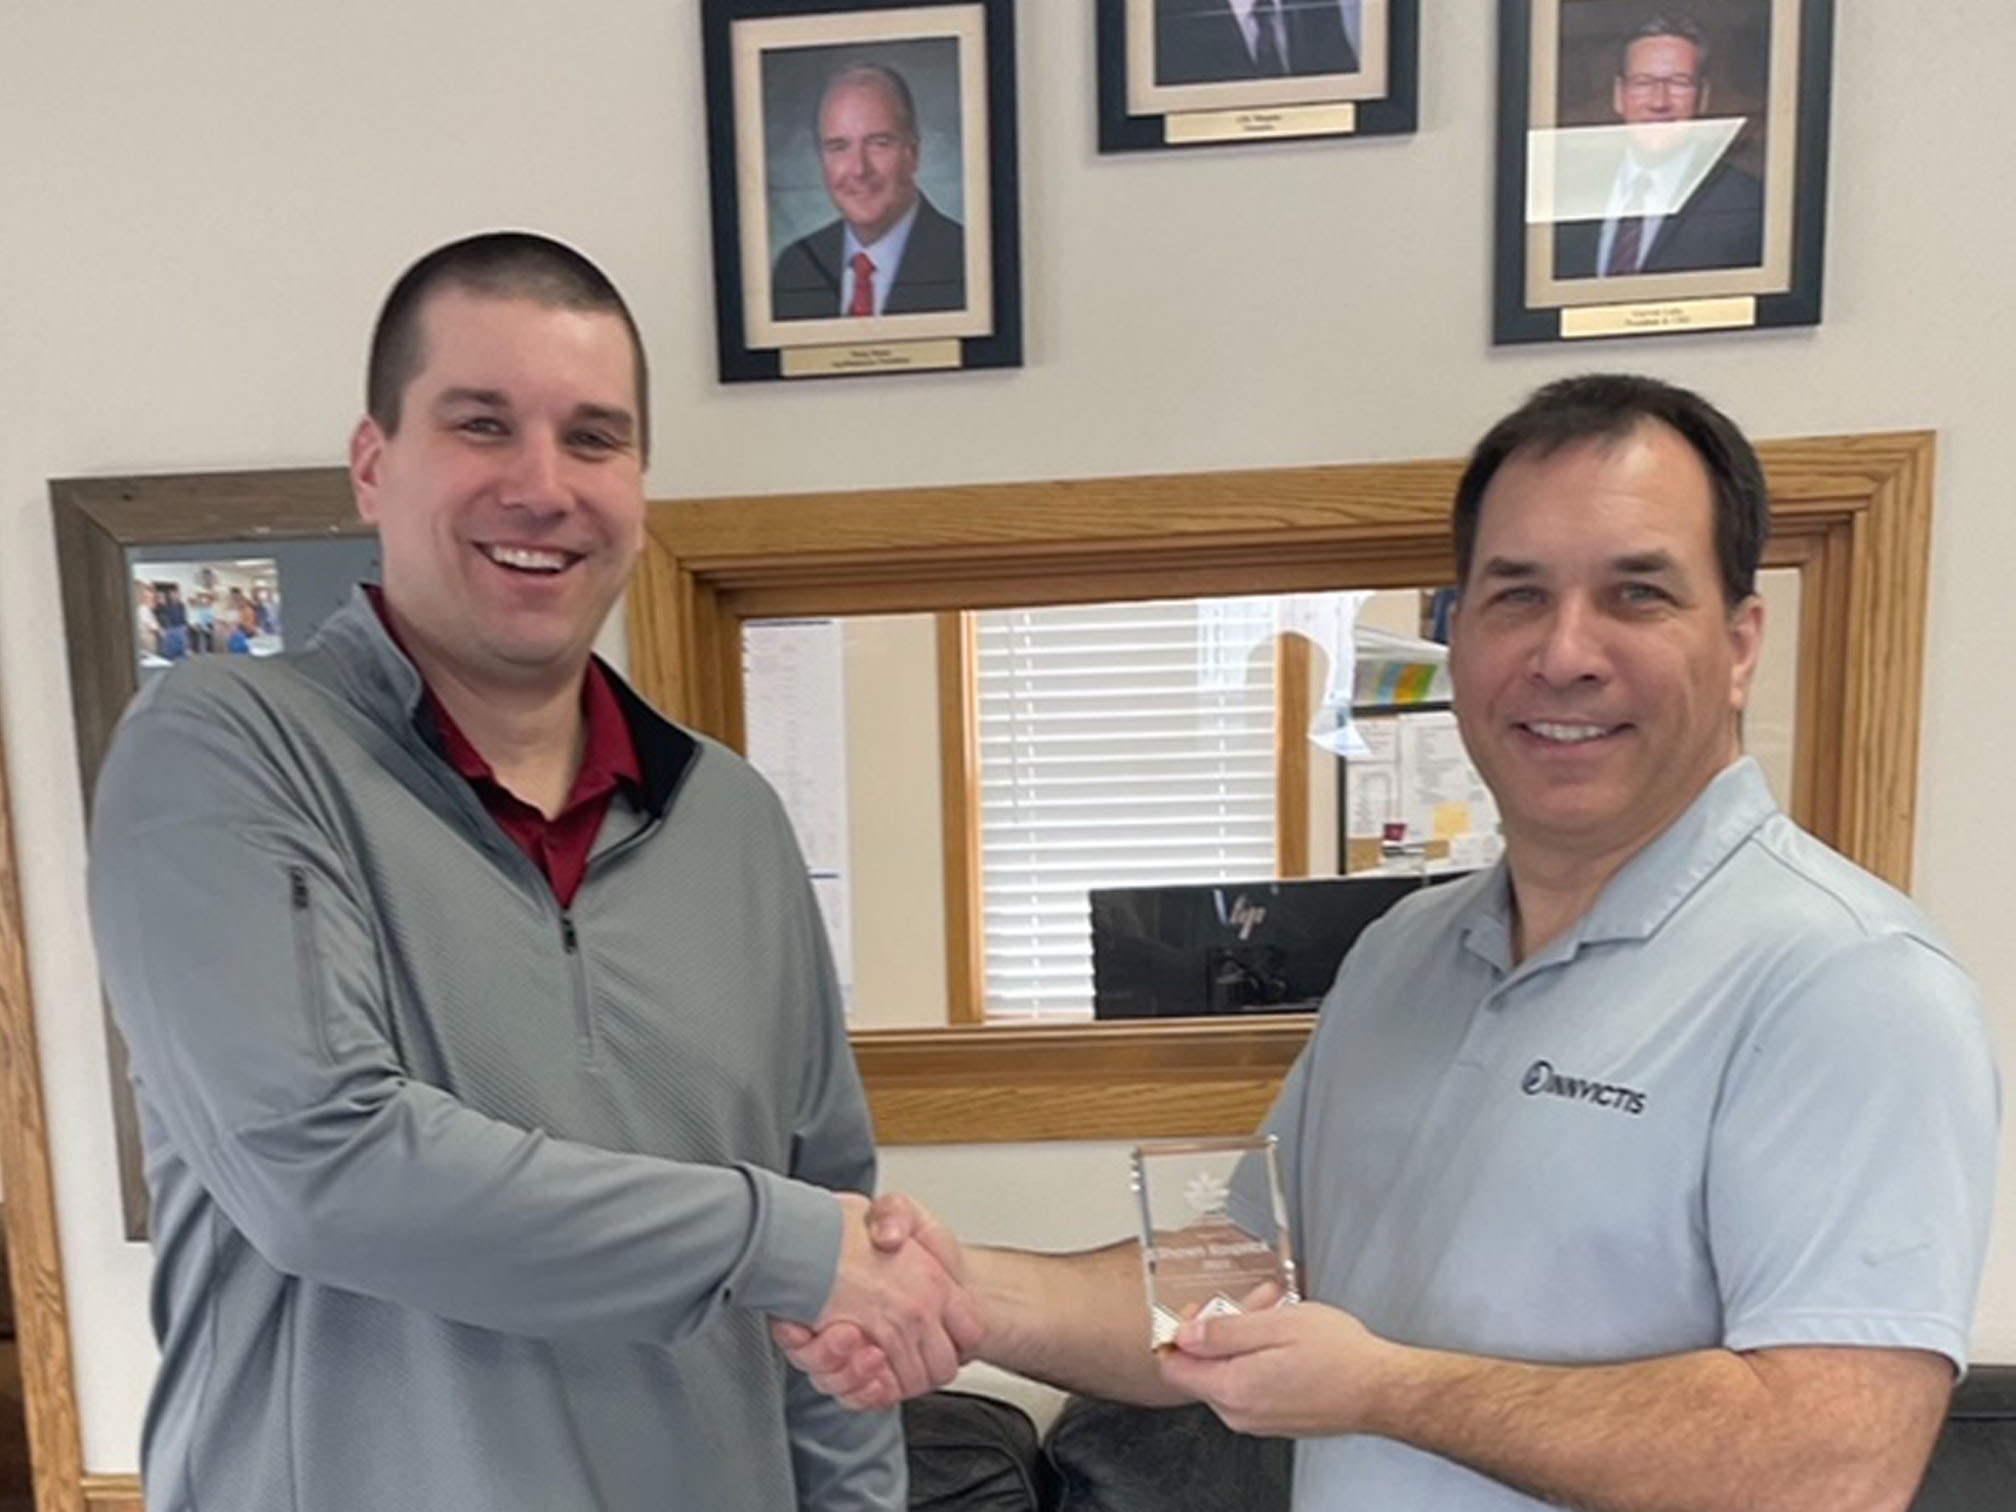 John Christianson, ND CCA Board Chair on left, presents Shawn Kaspric, CCA, CPAg with the 2023 ND Certified Crop Adviser Award. The two are shaking hands